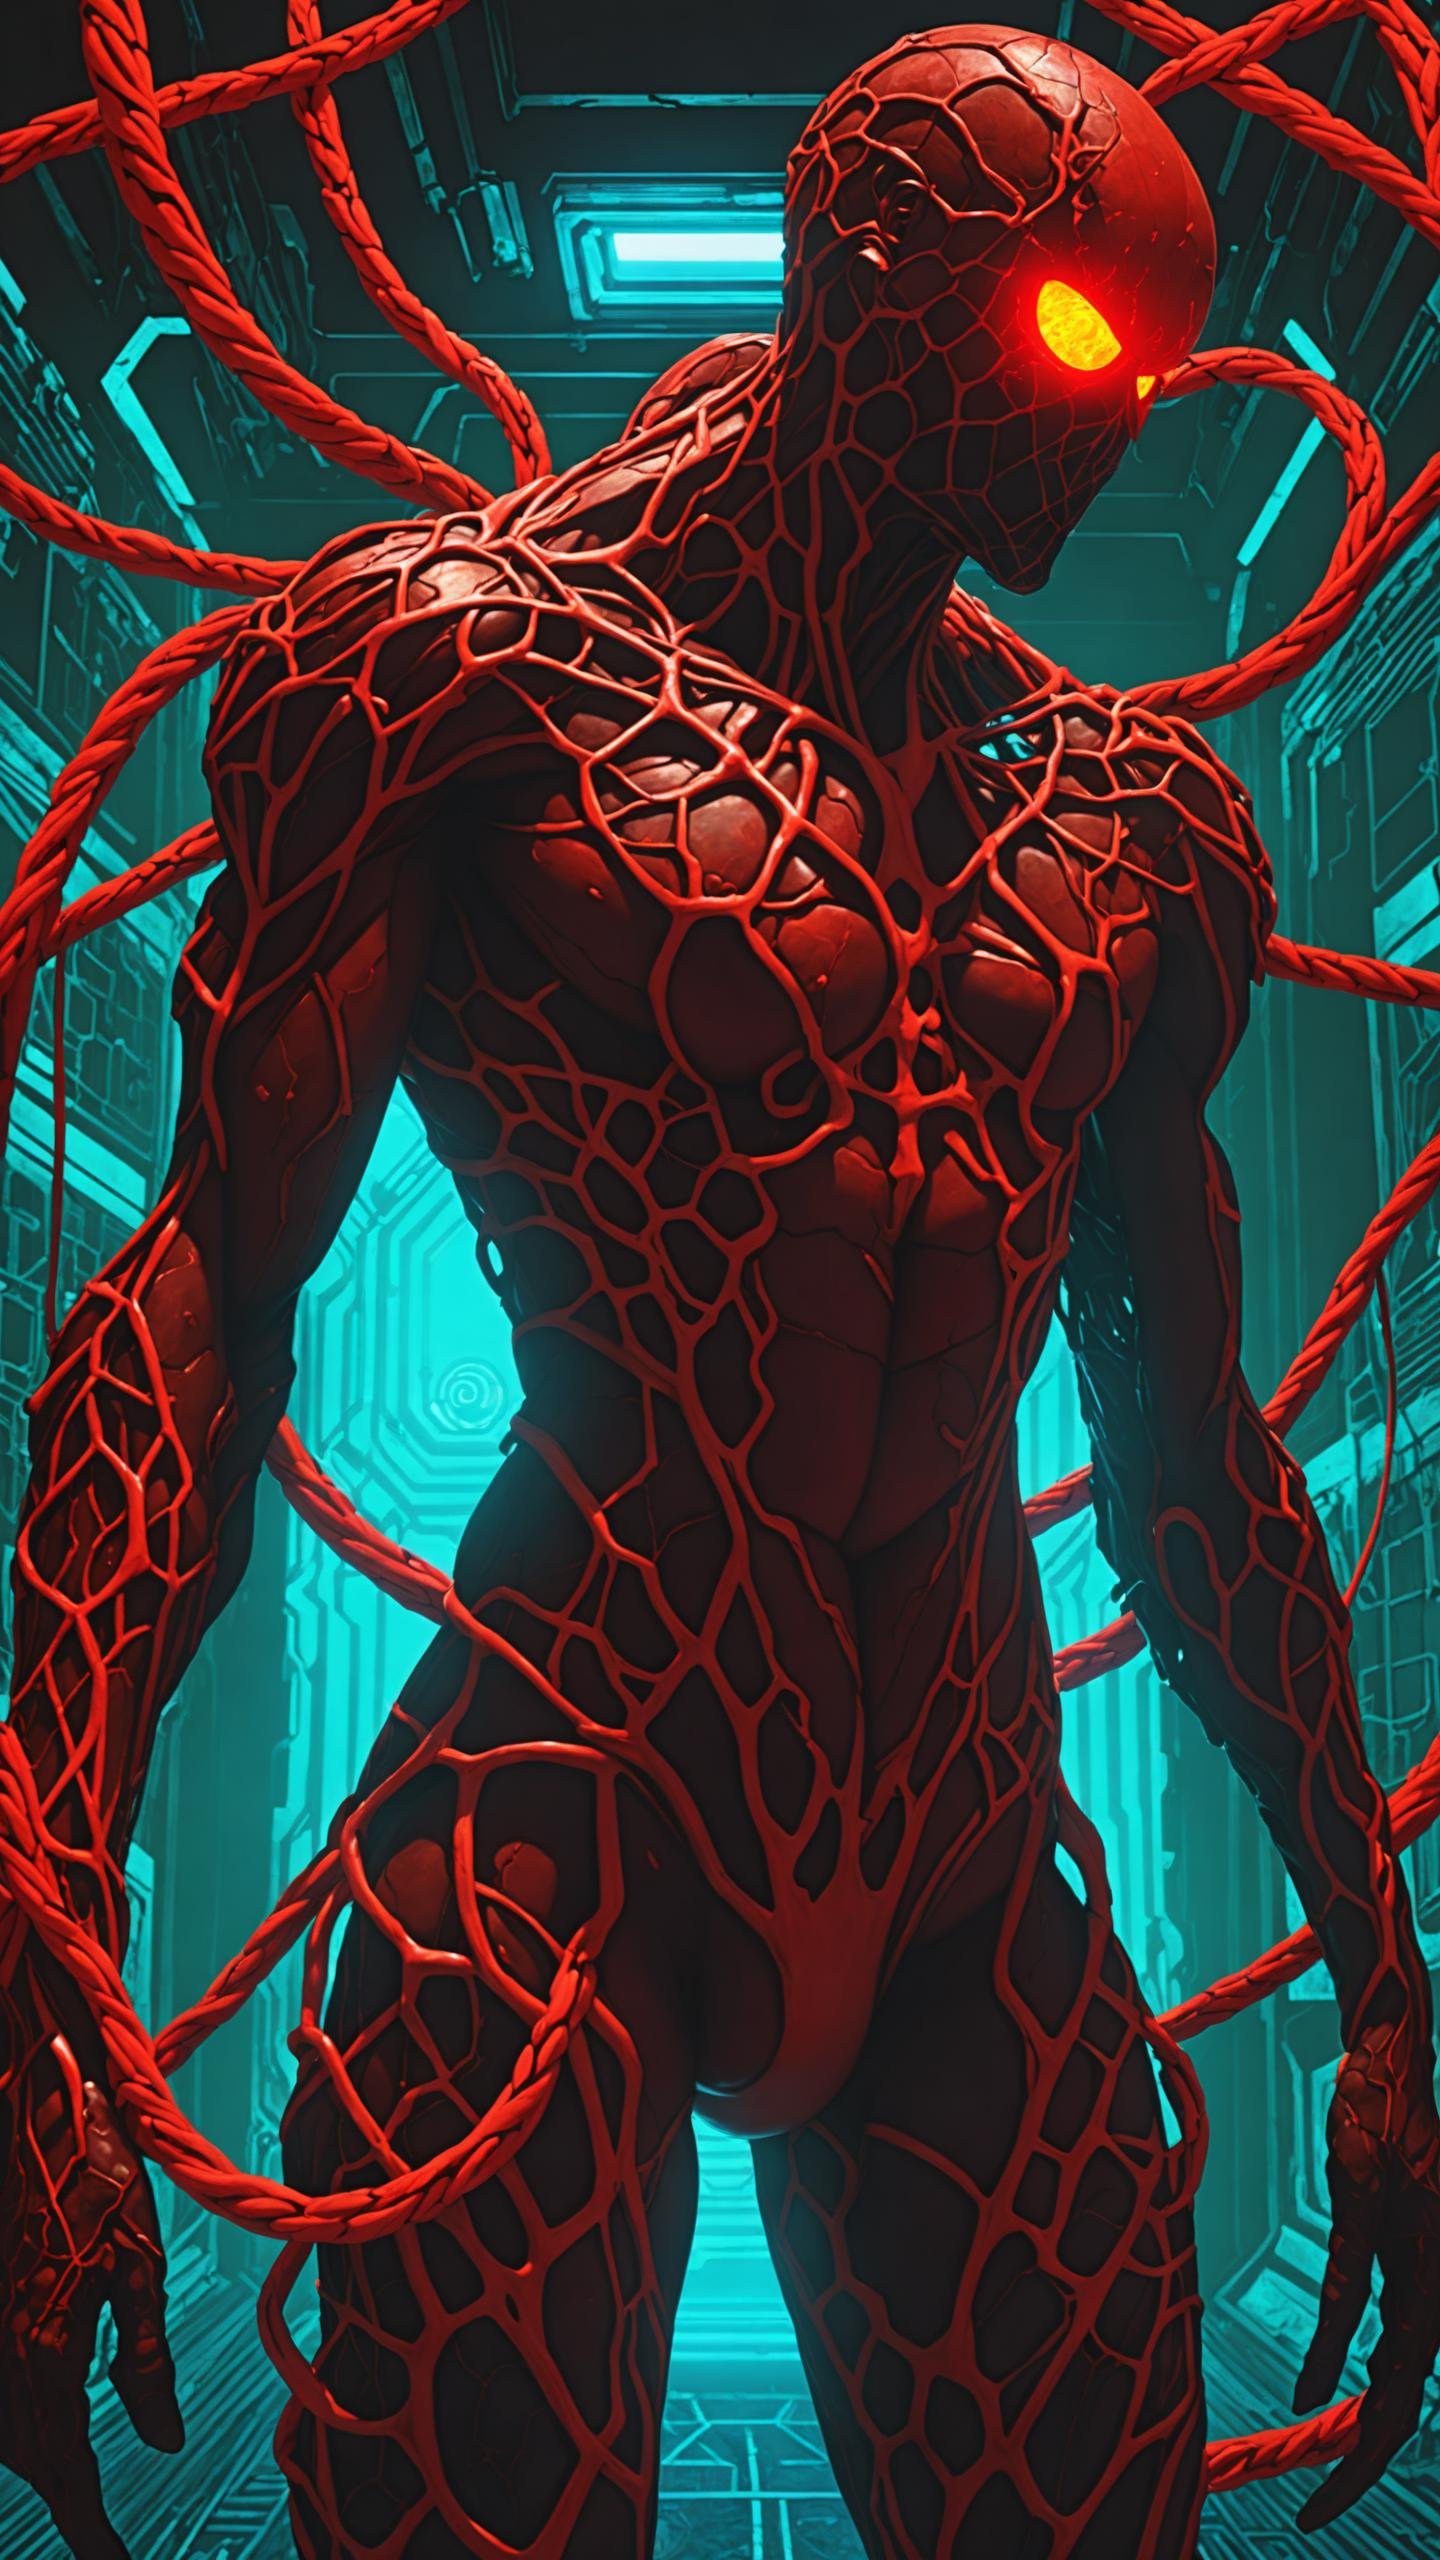 a cybermutant flesh mutant made of pulsating flesh and biomechanical limbs, hyper mutant girl, fusion of flesh and machine, quivering tumors, fleshy growths, mutagenic, cybernetic hoses, wires, anime style, 2d, fighting game style masterpiece, best quality, ultra realistic, 32k, RAW photo, detail skin, 8k uhd, dslr, high quality, film grain,\nShort and messy hair, dynamic, vibrant, action-packed, detailed character design, reminiscent of fighting video games, black bloody veins growing and intertwining out of the darkness, oozing thick neon rainbow blood, veins growing and pumping blood, vascular networks growing, connecting, expanding, red veins everywhere, zdzislaw beksinski, (vibrant colors:1.1), (Infrared:1.2), Rust, Hypercube, ultra detailed, intricate, oil on canvas, ((dry brush, ultra sharp)), (surrealism:1.1), (disturbing:1.1), beksinski style painting, sparks, lens flare, rim lighting, backlighting, RTX, Post Processing, satanic cross, man body, muscular, venom costume, (japanese portal), death shadow nightmare ethereal beast, floating into the abyssal heights, nebula, cinematic, dreaming, Film light, bathing in light, very sharp focus, Hyper detailed, Hyper realistic, masterpiece, spiritual, surreal, atmospheric, maroon cream bronze, High resolution, Vibrant, High contrast, dark angle, 8k, HDR, 500px, dystopian